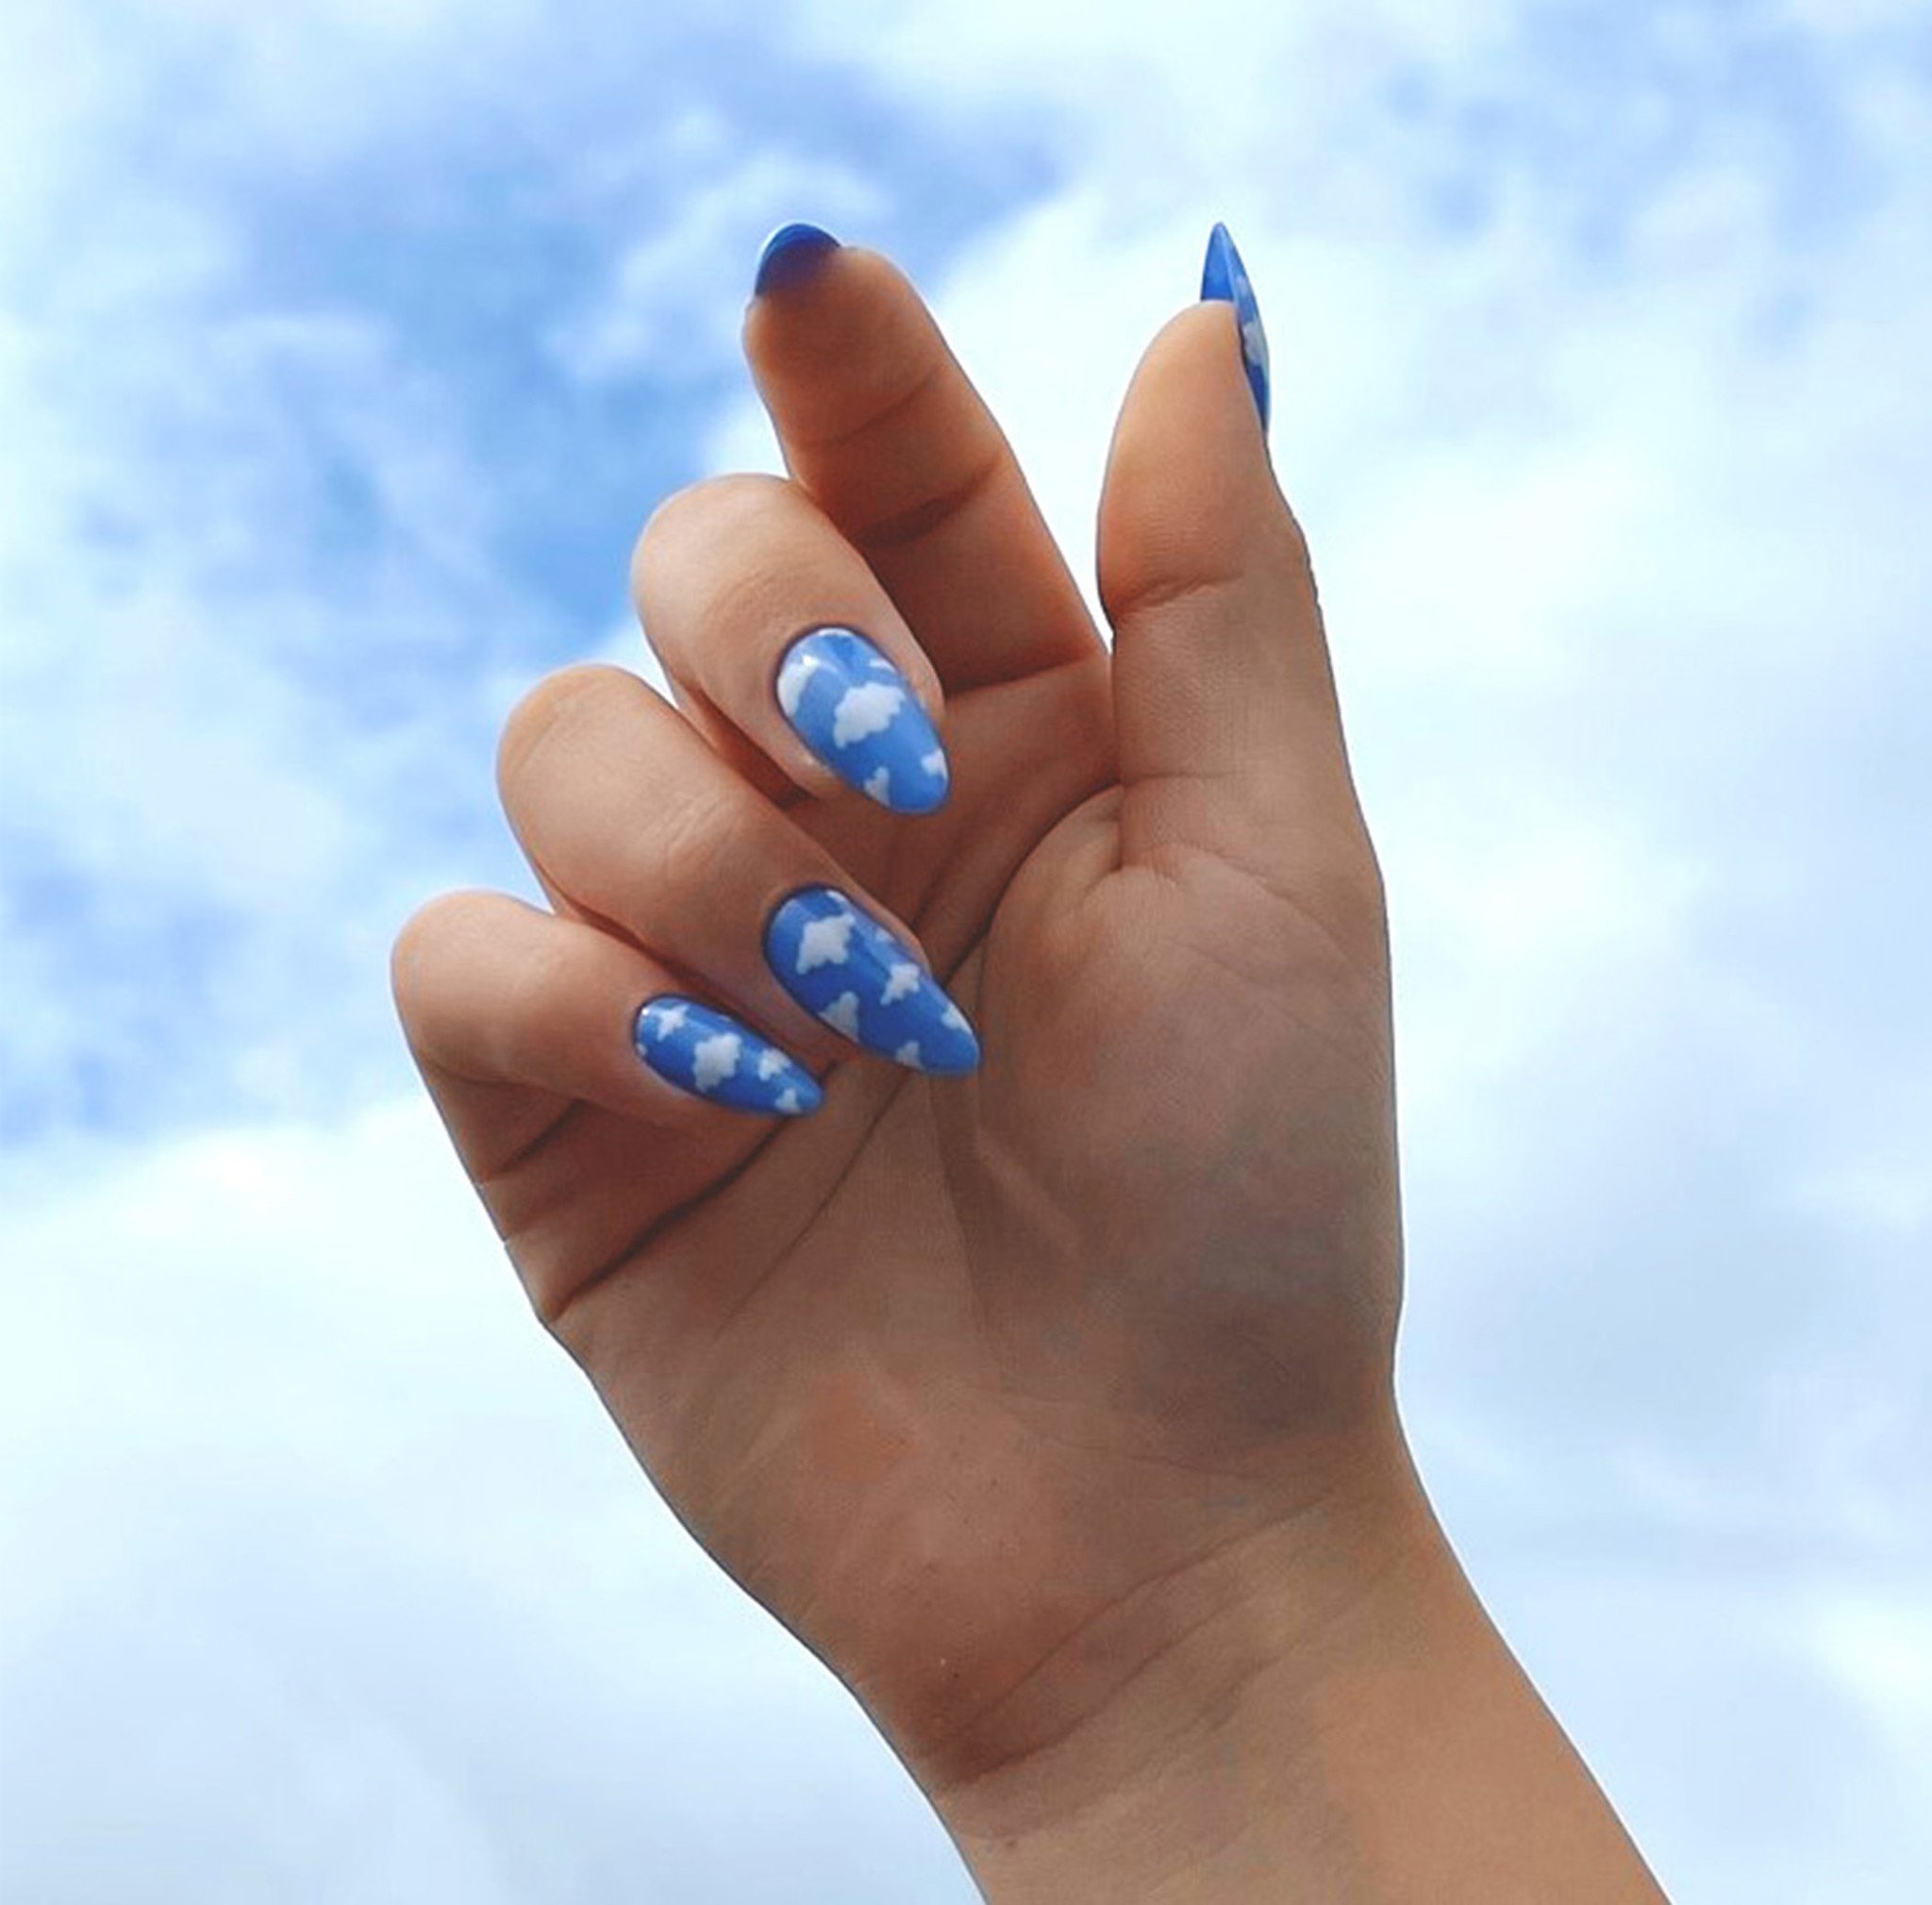 Nailart: Head in the clouds